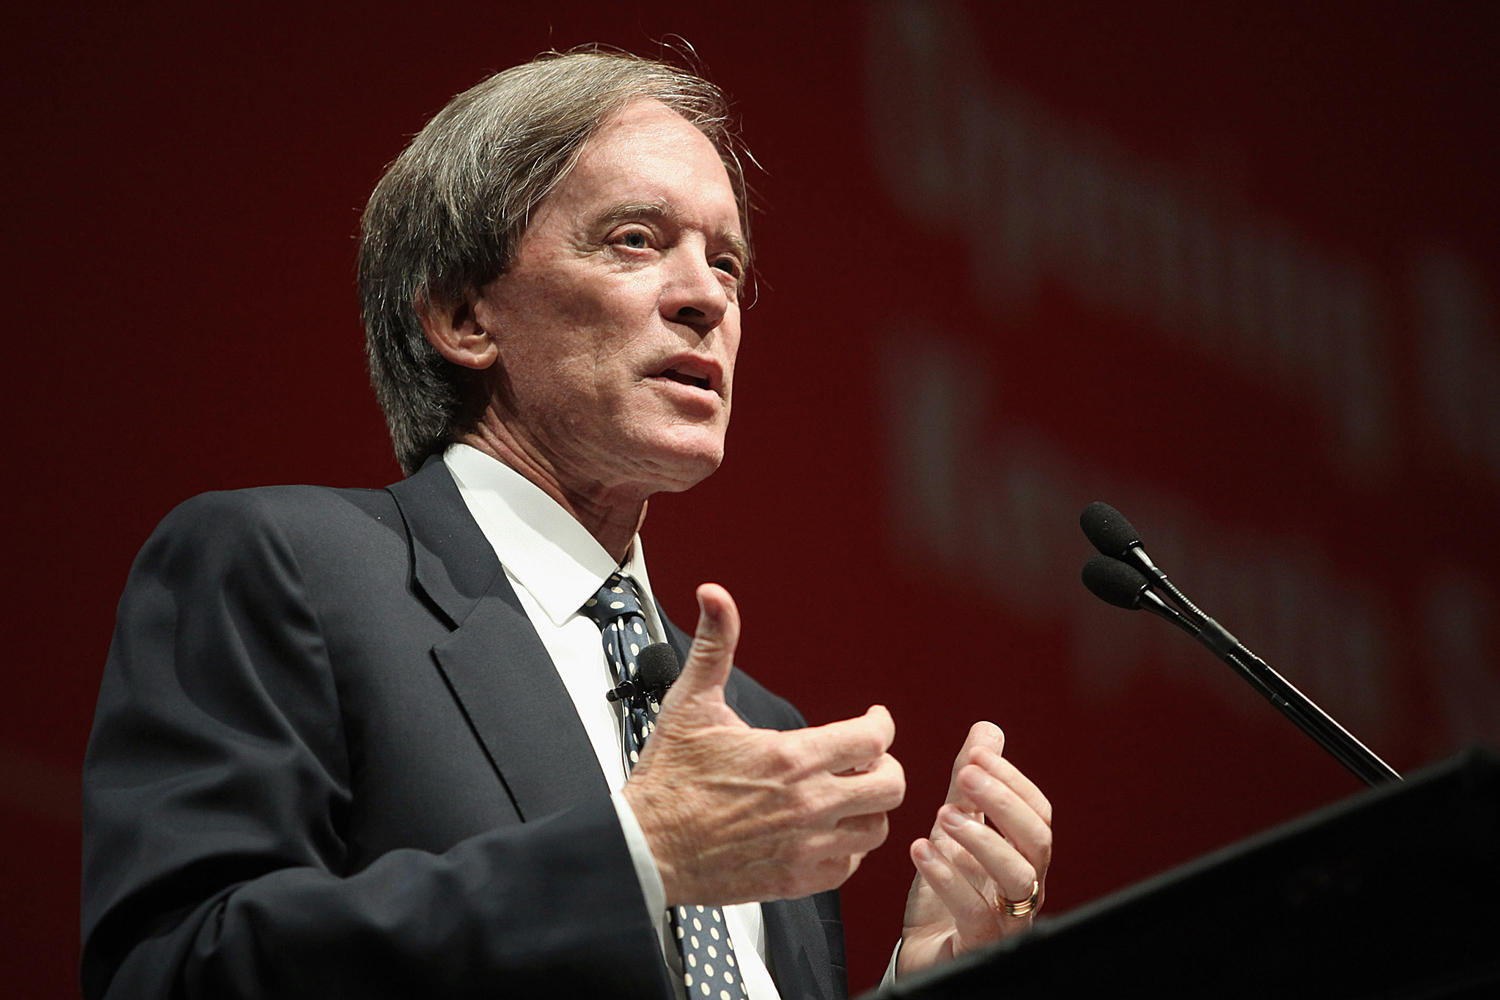 Morningstar Conference With Bill Gross Of PIMCO